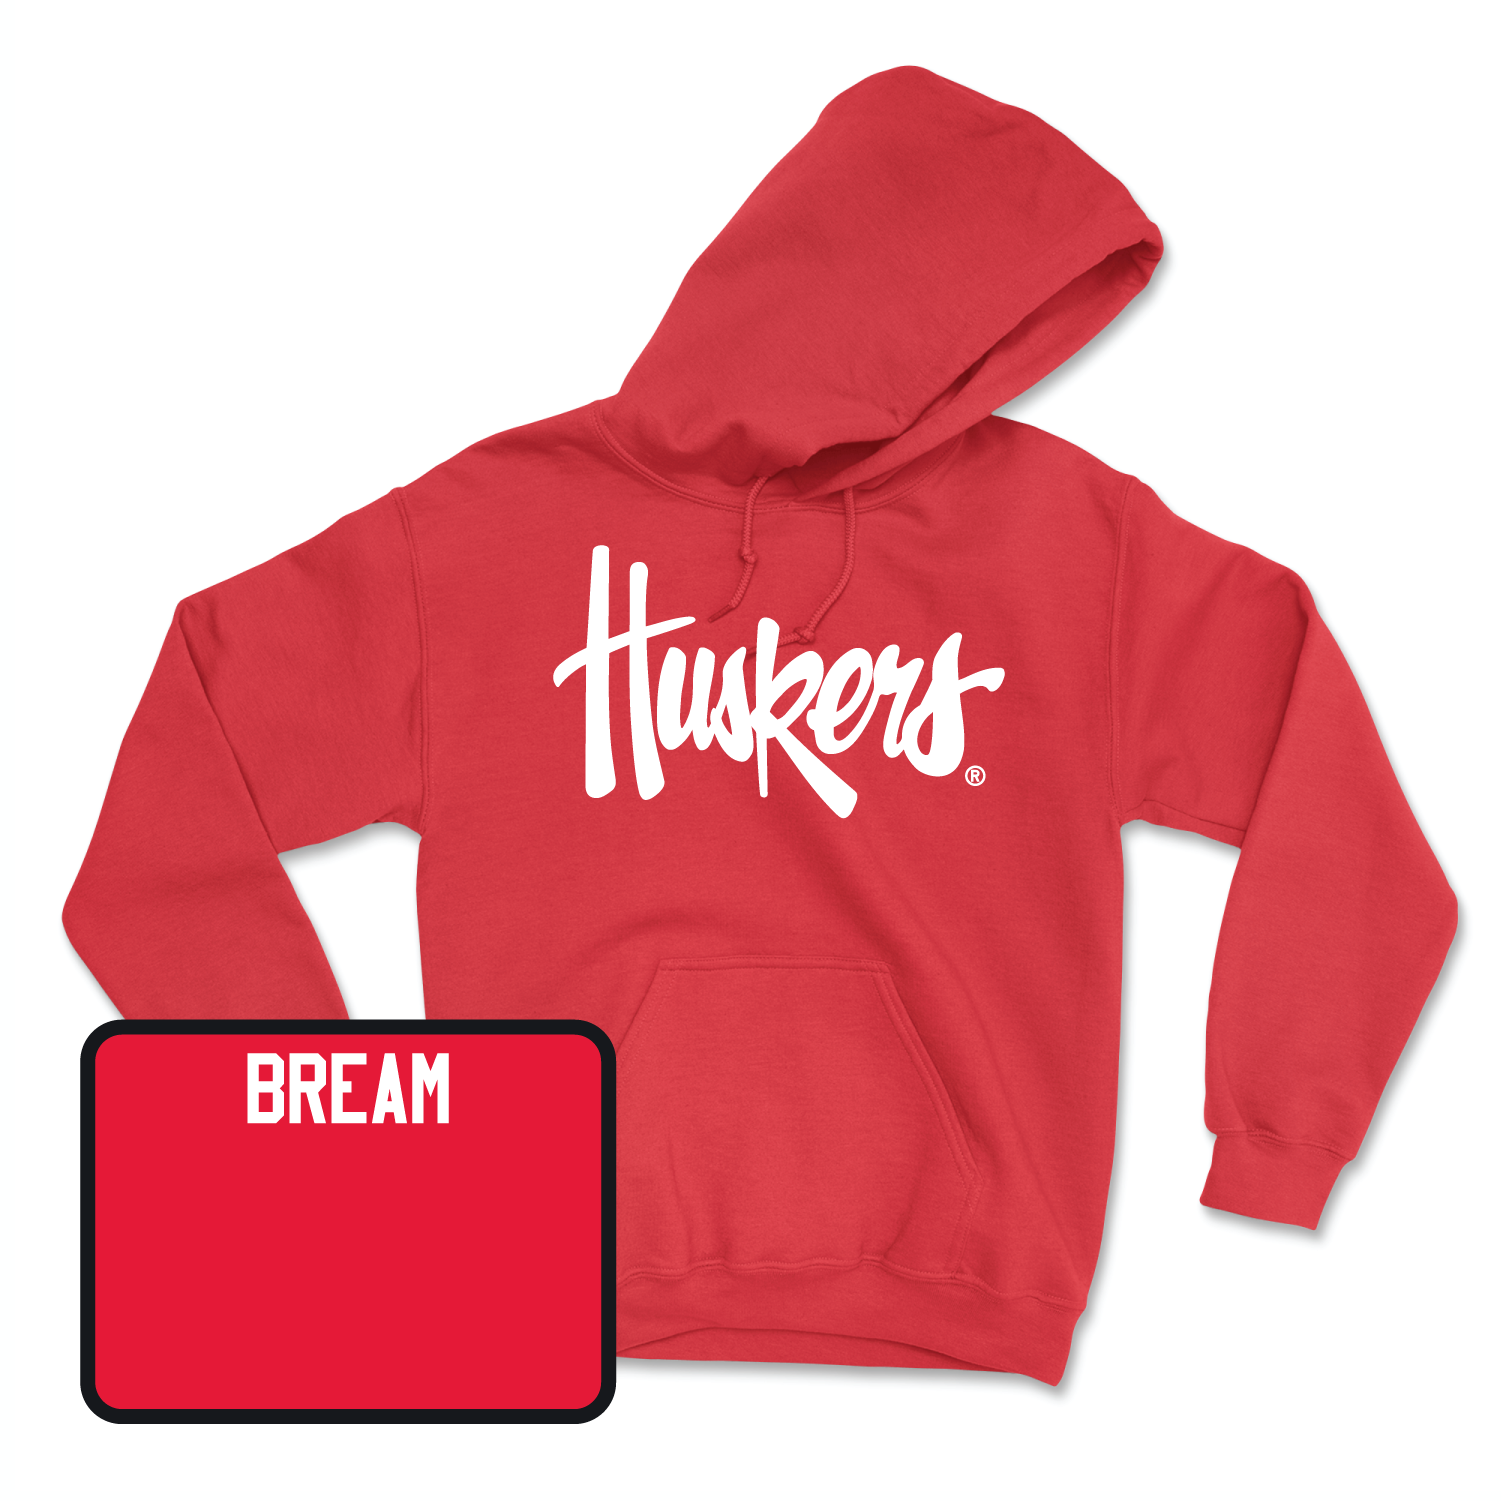 Red Women's Golf Huskers Hoodie X-Large / Brooke Bream